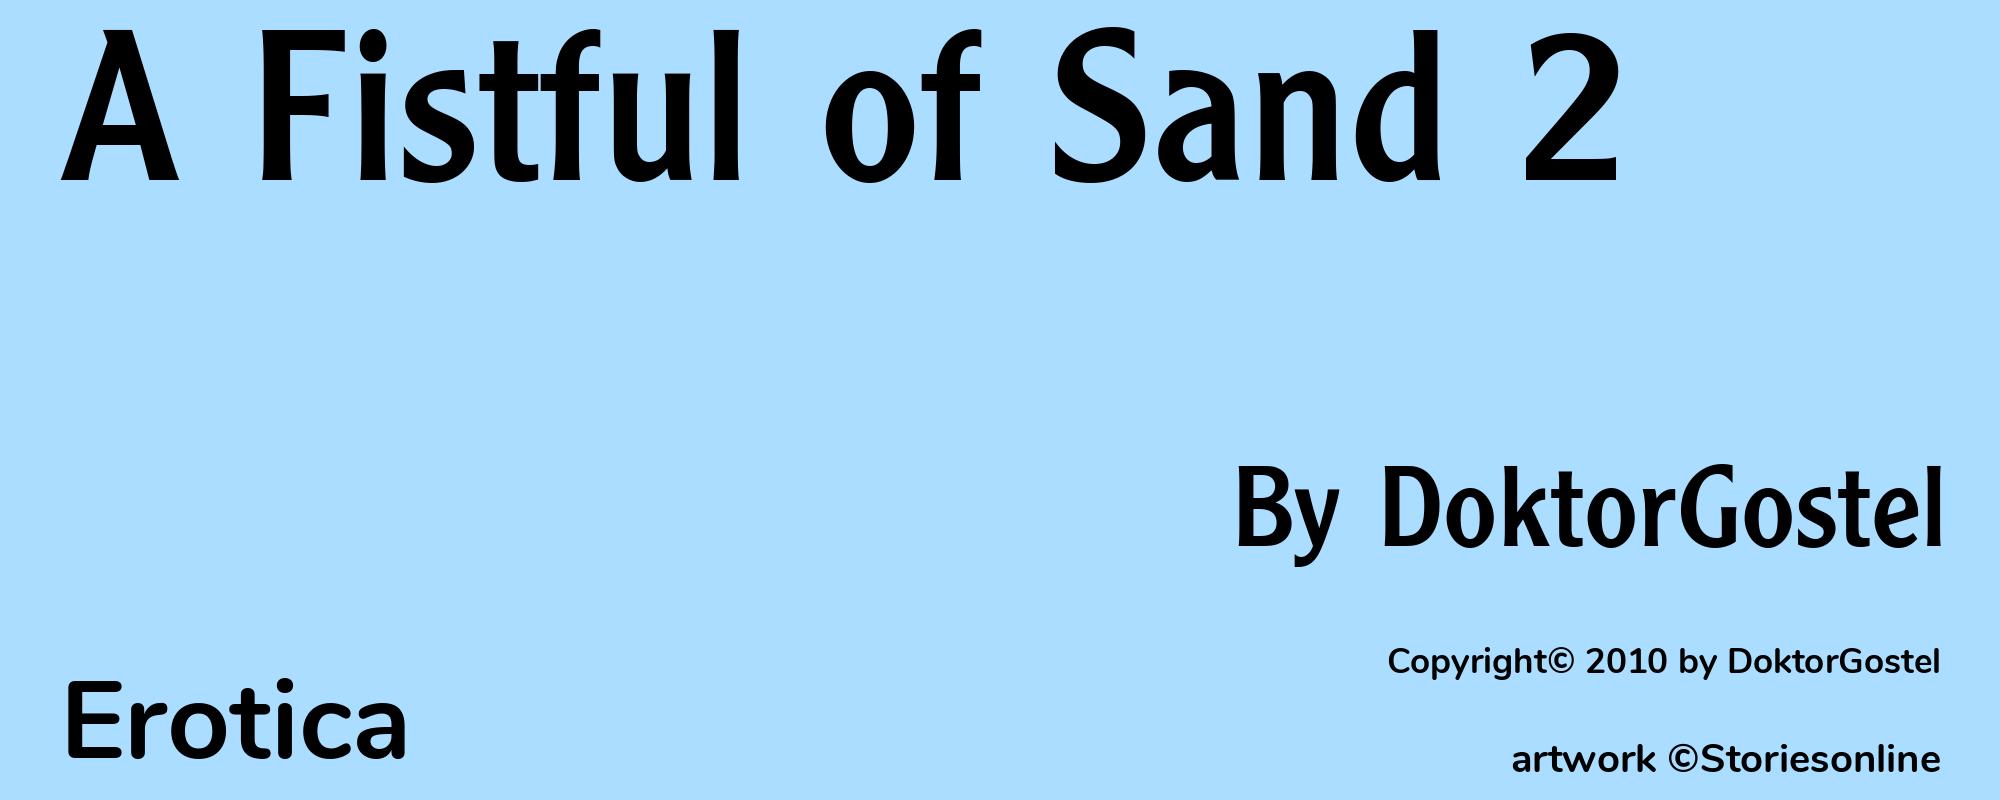 A Fistful of Sand 2 - Cover